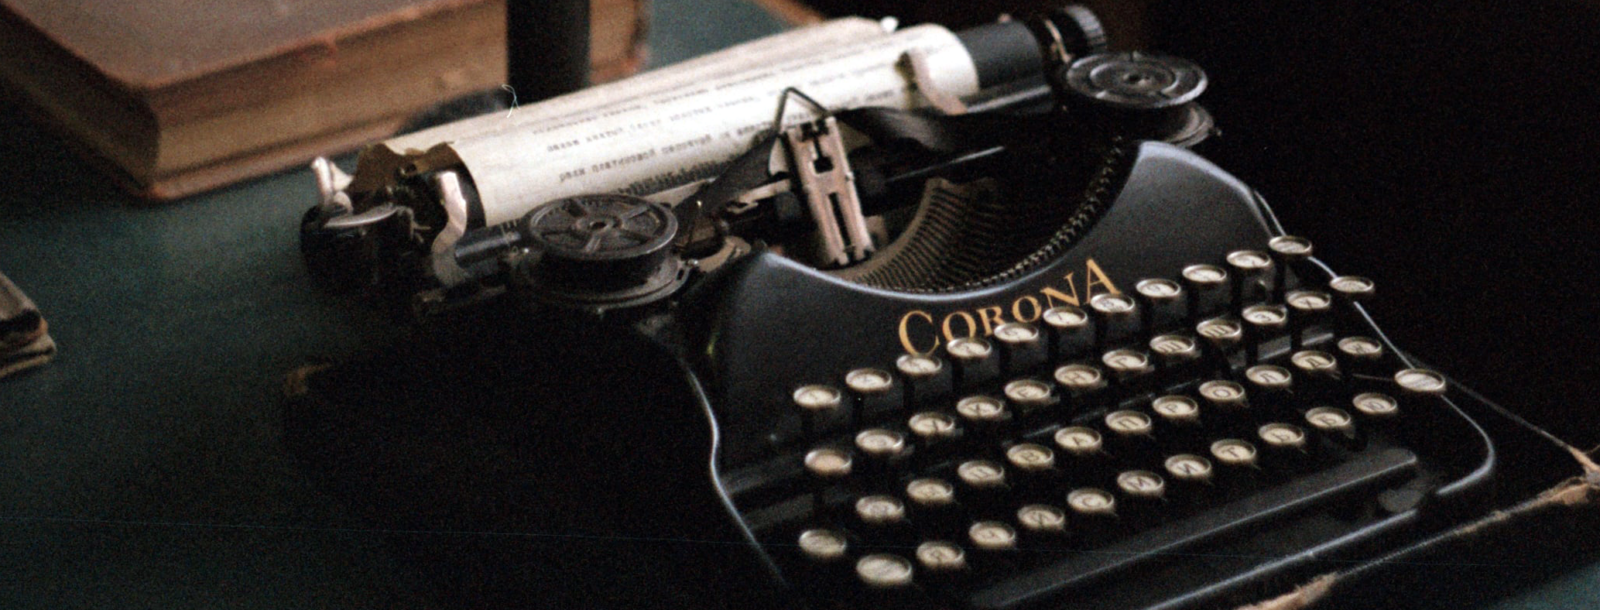 An old typewriter on a desk with books